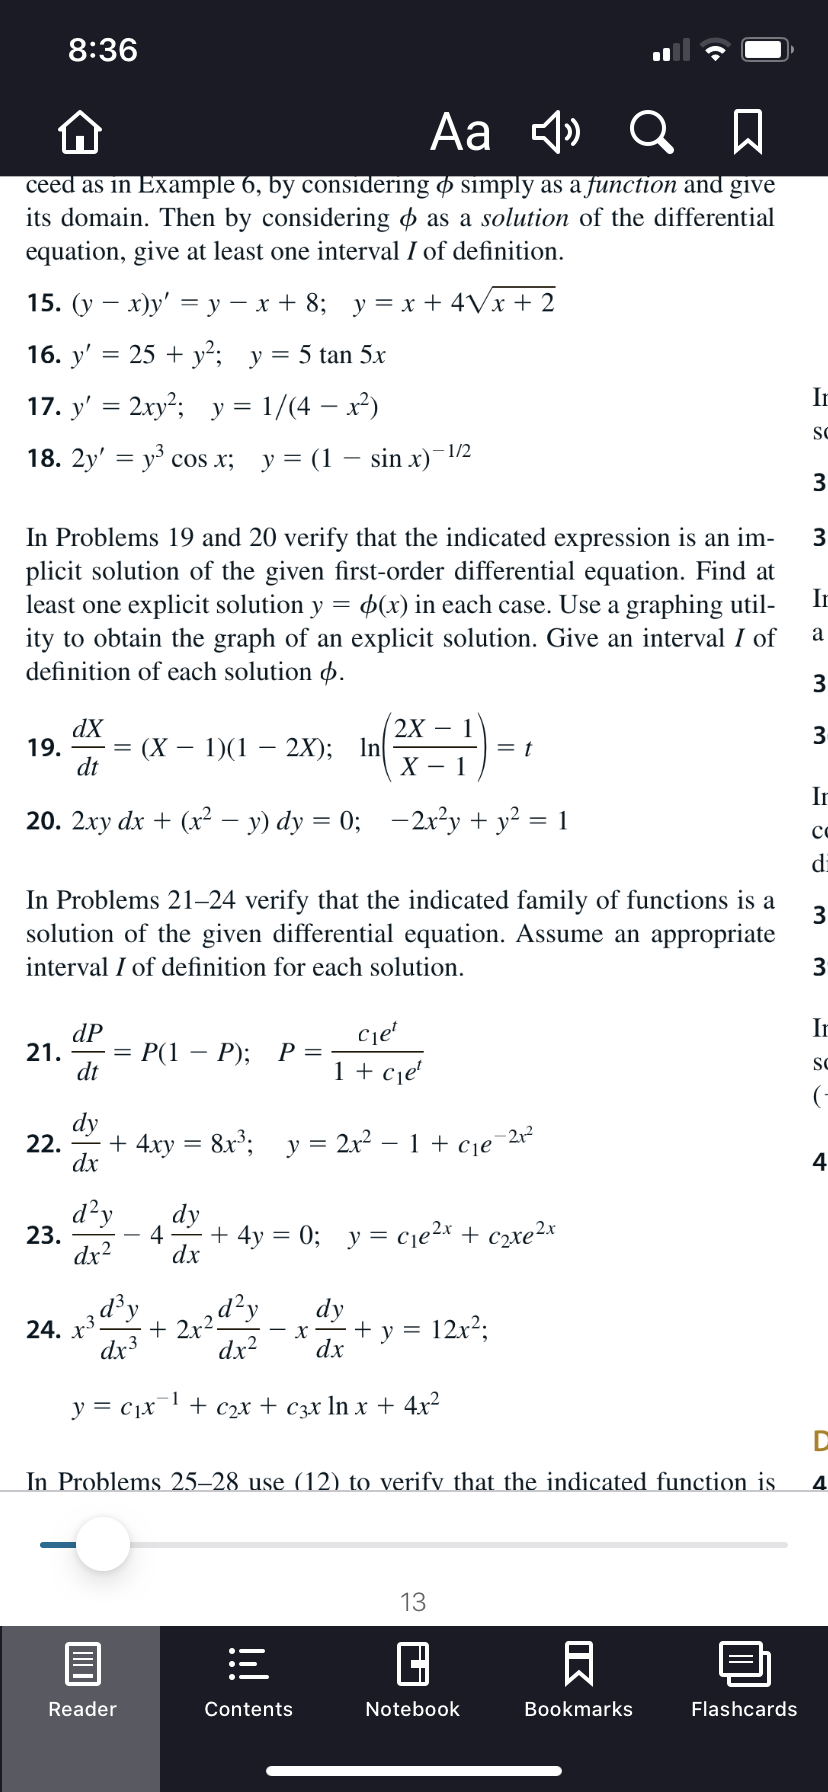 8:36
Aa 4» Q A
ceed as in Example 6, by considering ø simply as a function and give
its domain. Then by considering o as a solution of the differential
equation, give at least one interval I of definition.
15. (у — х)у' —у — х+ 8; у%3Dх + 4Vx+ 2
16. y' = 25 + y²; y= 5 tan 5x
In
17. y' = 2xy²; y = 1/(4 – x²)
SC
- 1/2
18. 2y' — уз сos x; у%3D (1 — sin x)
3
In Problems 19 and 20 verify that the indicated expression is an im-
plicit solution of the given first-order differential equation. Find at
least one explicit solution y = p(x) in each case. Use a graphing util-
ity to obtain the graph of an explicit solution. Give an interval I of
definition of each solution p.
In
3
2X – 1
dX
19.
dt
(X – 1)(1
2X); In
In
20. 2xy dx + (x2² – y) dy = 0; –2x²y + y² = 1
co
di
In Problems 21–24 verify that the indicated family of functions is a
solution of the given differential equation. Assume an appropriate
interval I of definition for each solution.
3
In
dP
21.
dt
Ce'
P(1
- P);
1 + cje'
SC
(-
dy
22. - + 4xy
dx
8x; y =
2x² – 1 + cje
-212
4
d?y
dy
4
+ 4y = 0; y = cje2x + c2xe2x
23.
dx2
dx
* 2r2d?,
dx?
d³y
dy
12x2;
24.
dx3
+ y
х
dx
1
y = c1x
+ С2х + Сэх In x + 4x2
In Problems 25–28 use (12) to verify that the indicated function is
4
13
Reader
Notebook
Bookmarks
Flashcards
Contents
IK
ШО
